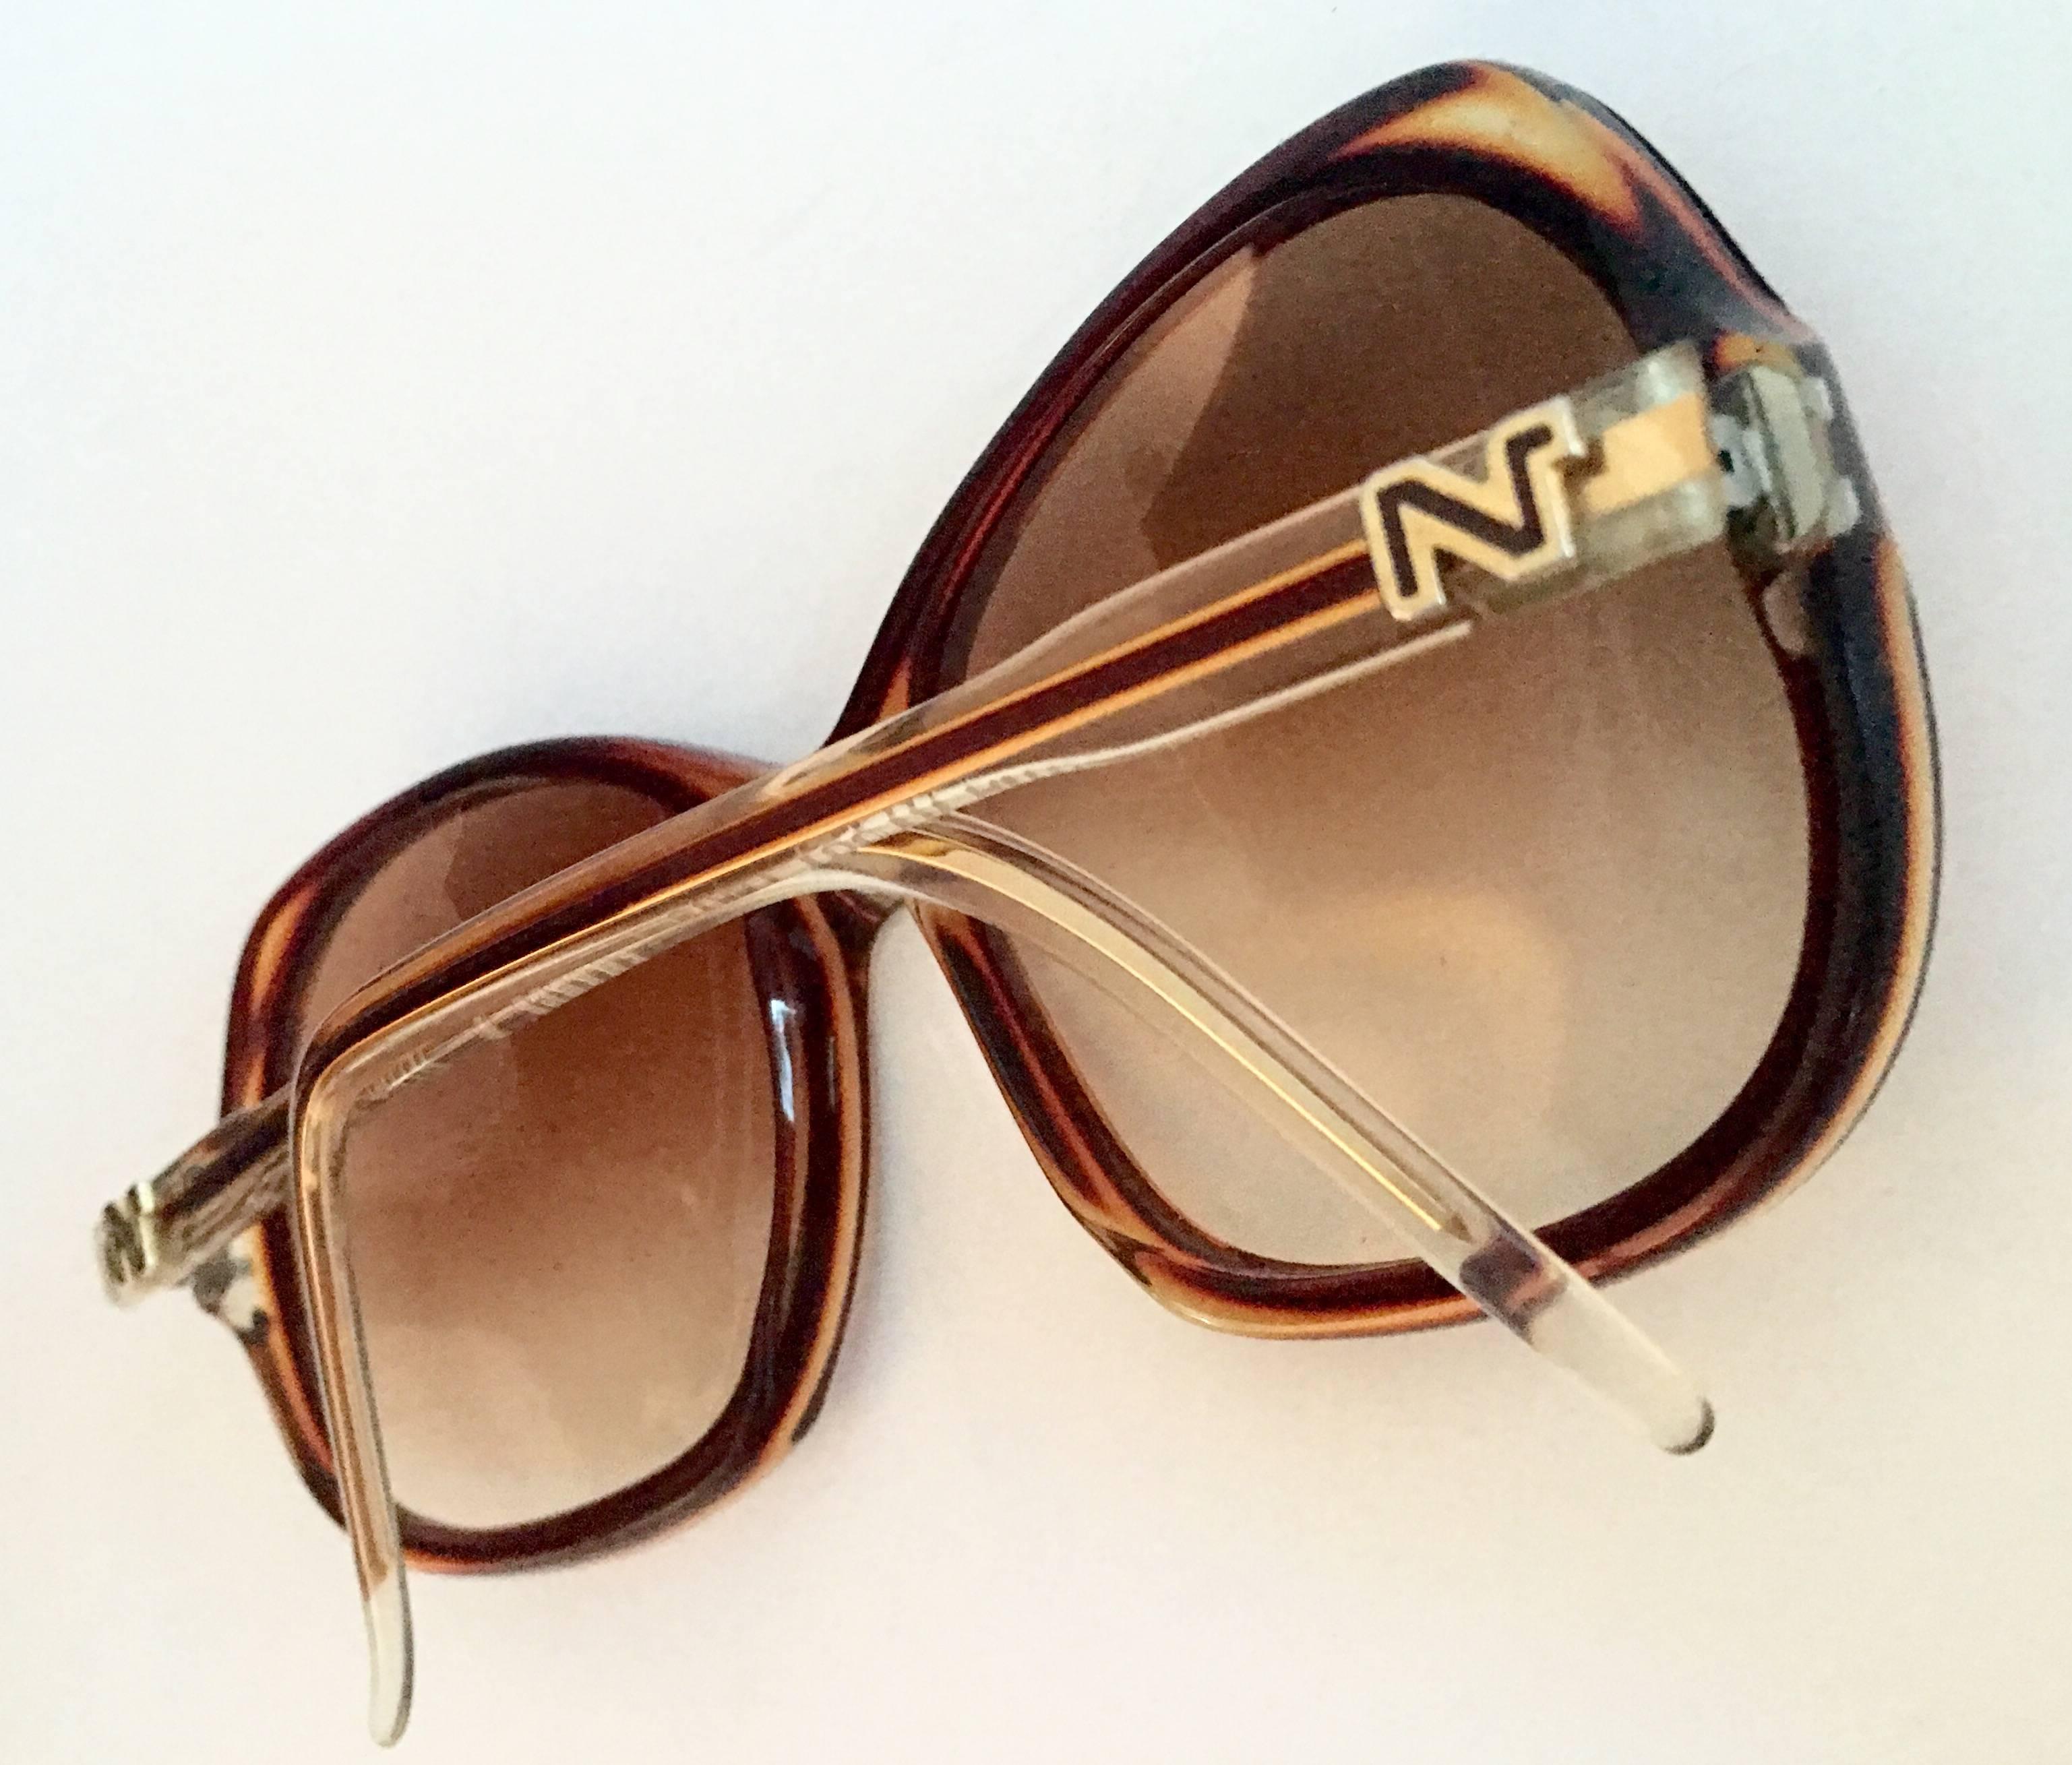 1970s Mod amber and gold designer Nina Ricci sunglasses. Ombre color and "N" logo detail. Includes original soft Nina Ricci Logo embossed protective case included.